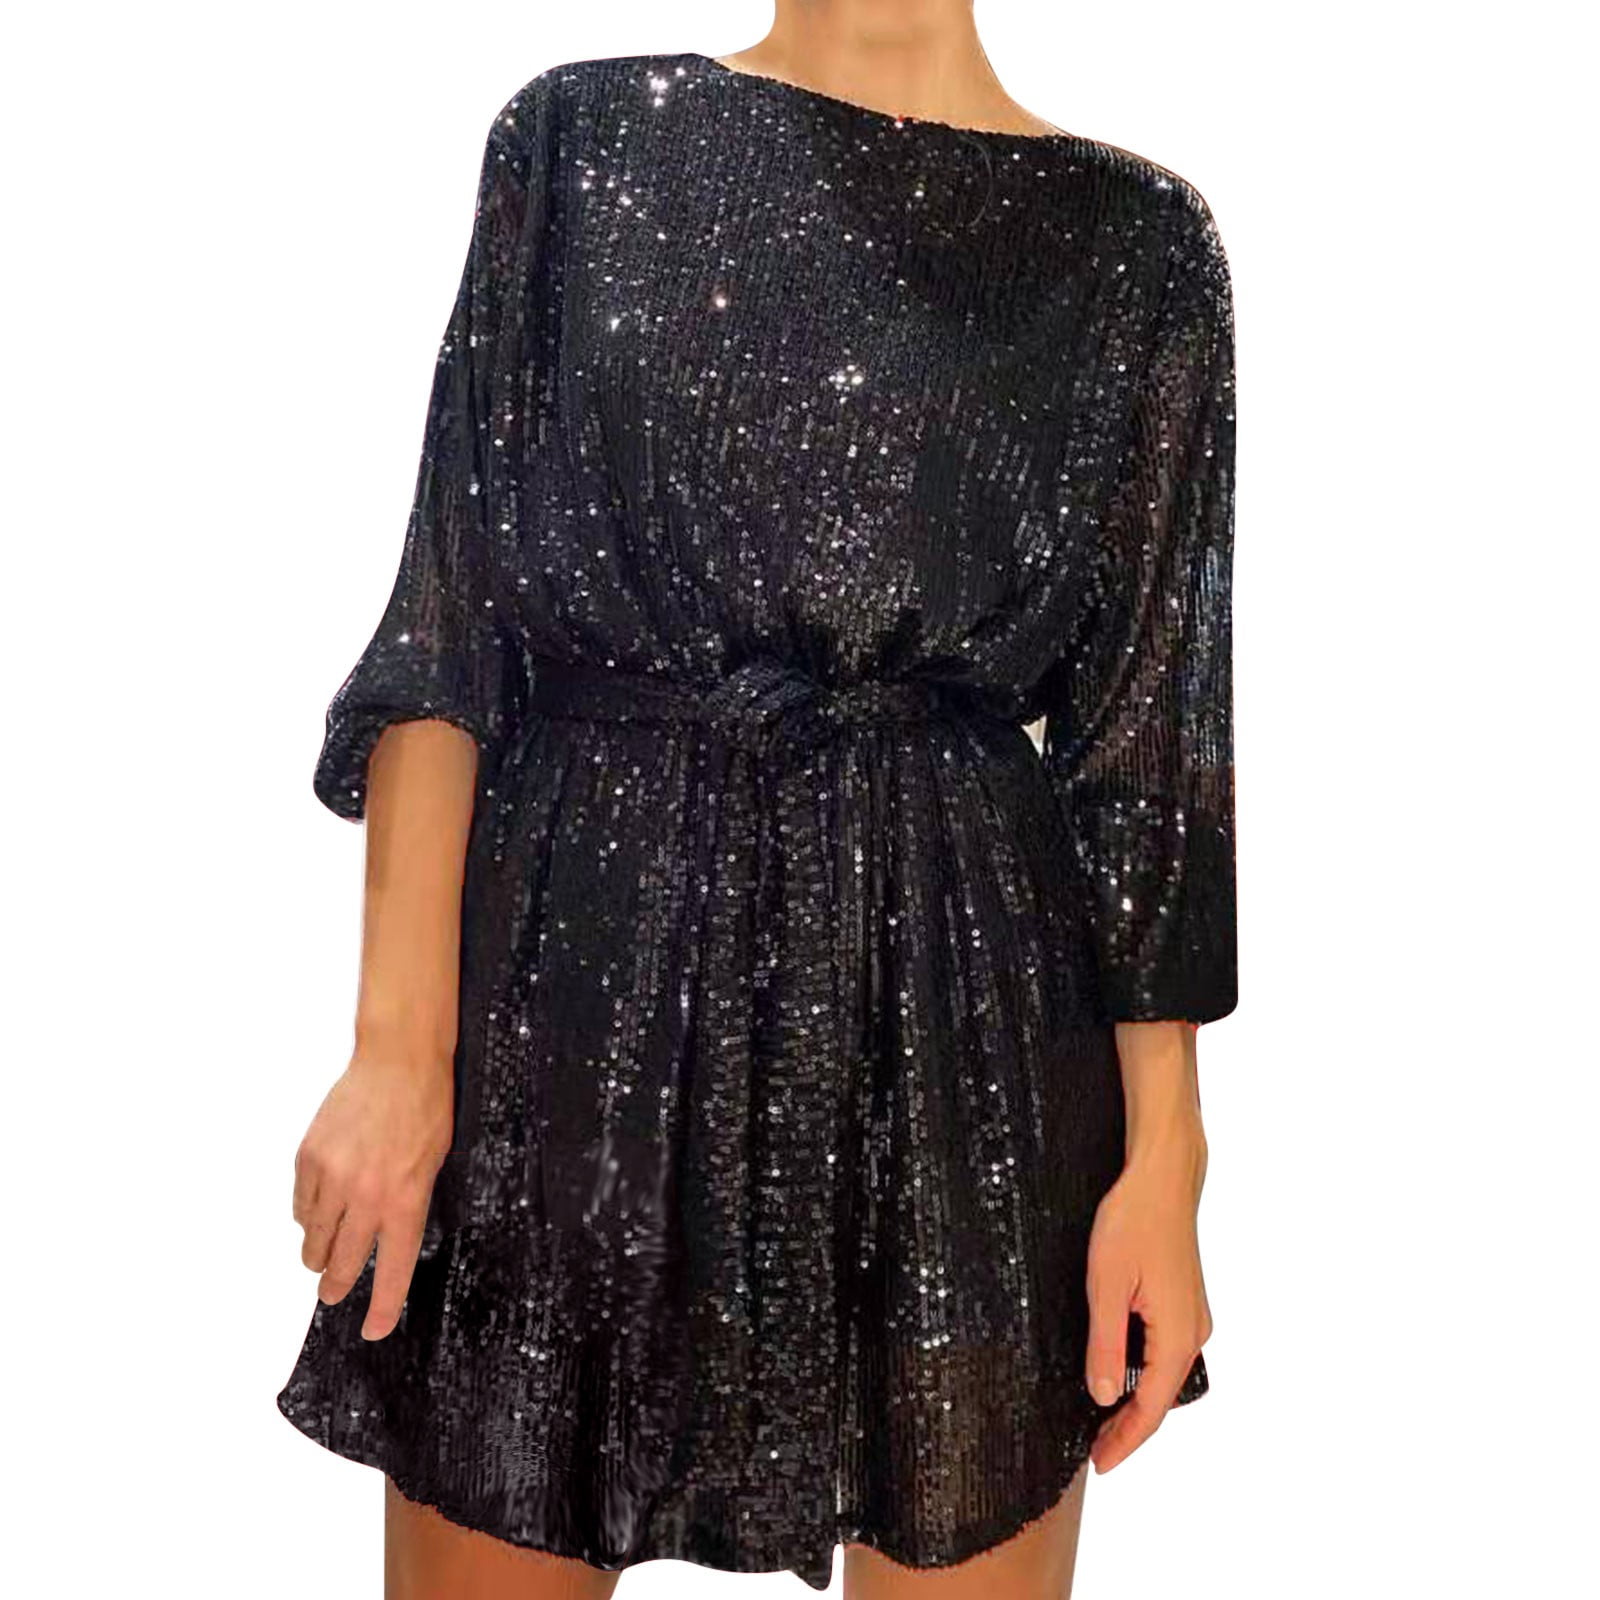 Noarlalf Womens Dresses Holiday Party Sequin Beaded Lace Up Long ...